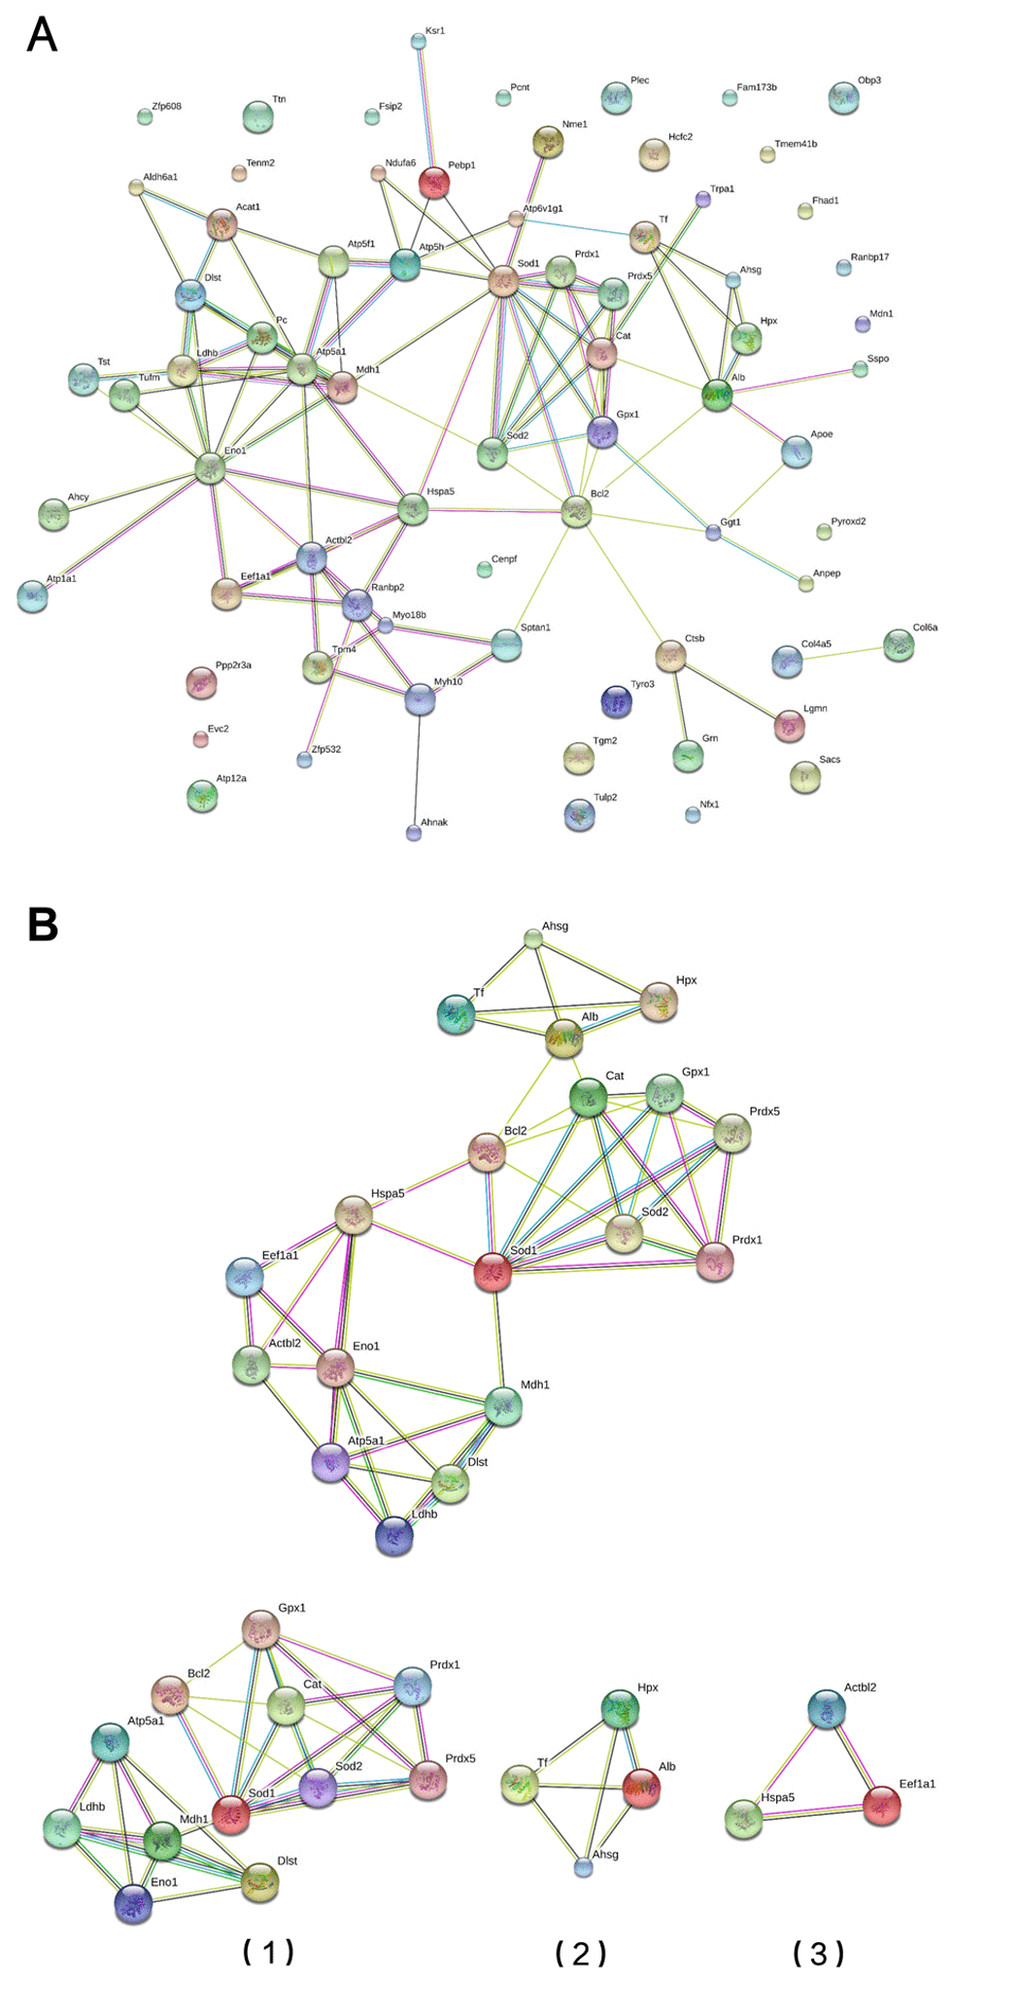 Module screening of a PPI network of DEPs. (A) Protein-protein interaction network of DEPs (STRING). (B) PPI network modules screened using the Molecular Complex Detection plug-in. Three PPI network modules were screened (1, 2 and 3).